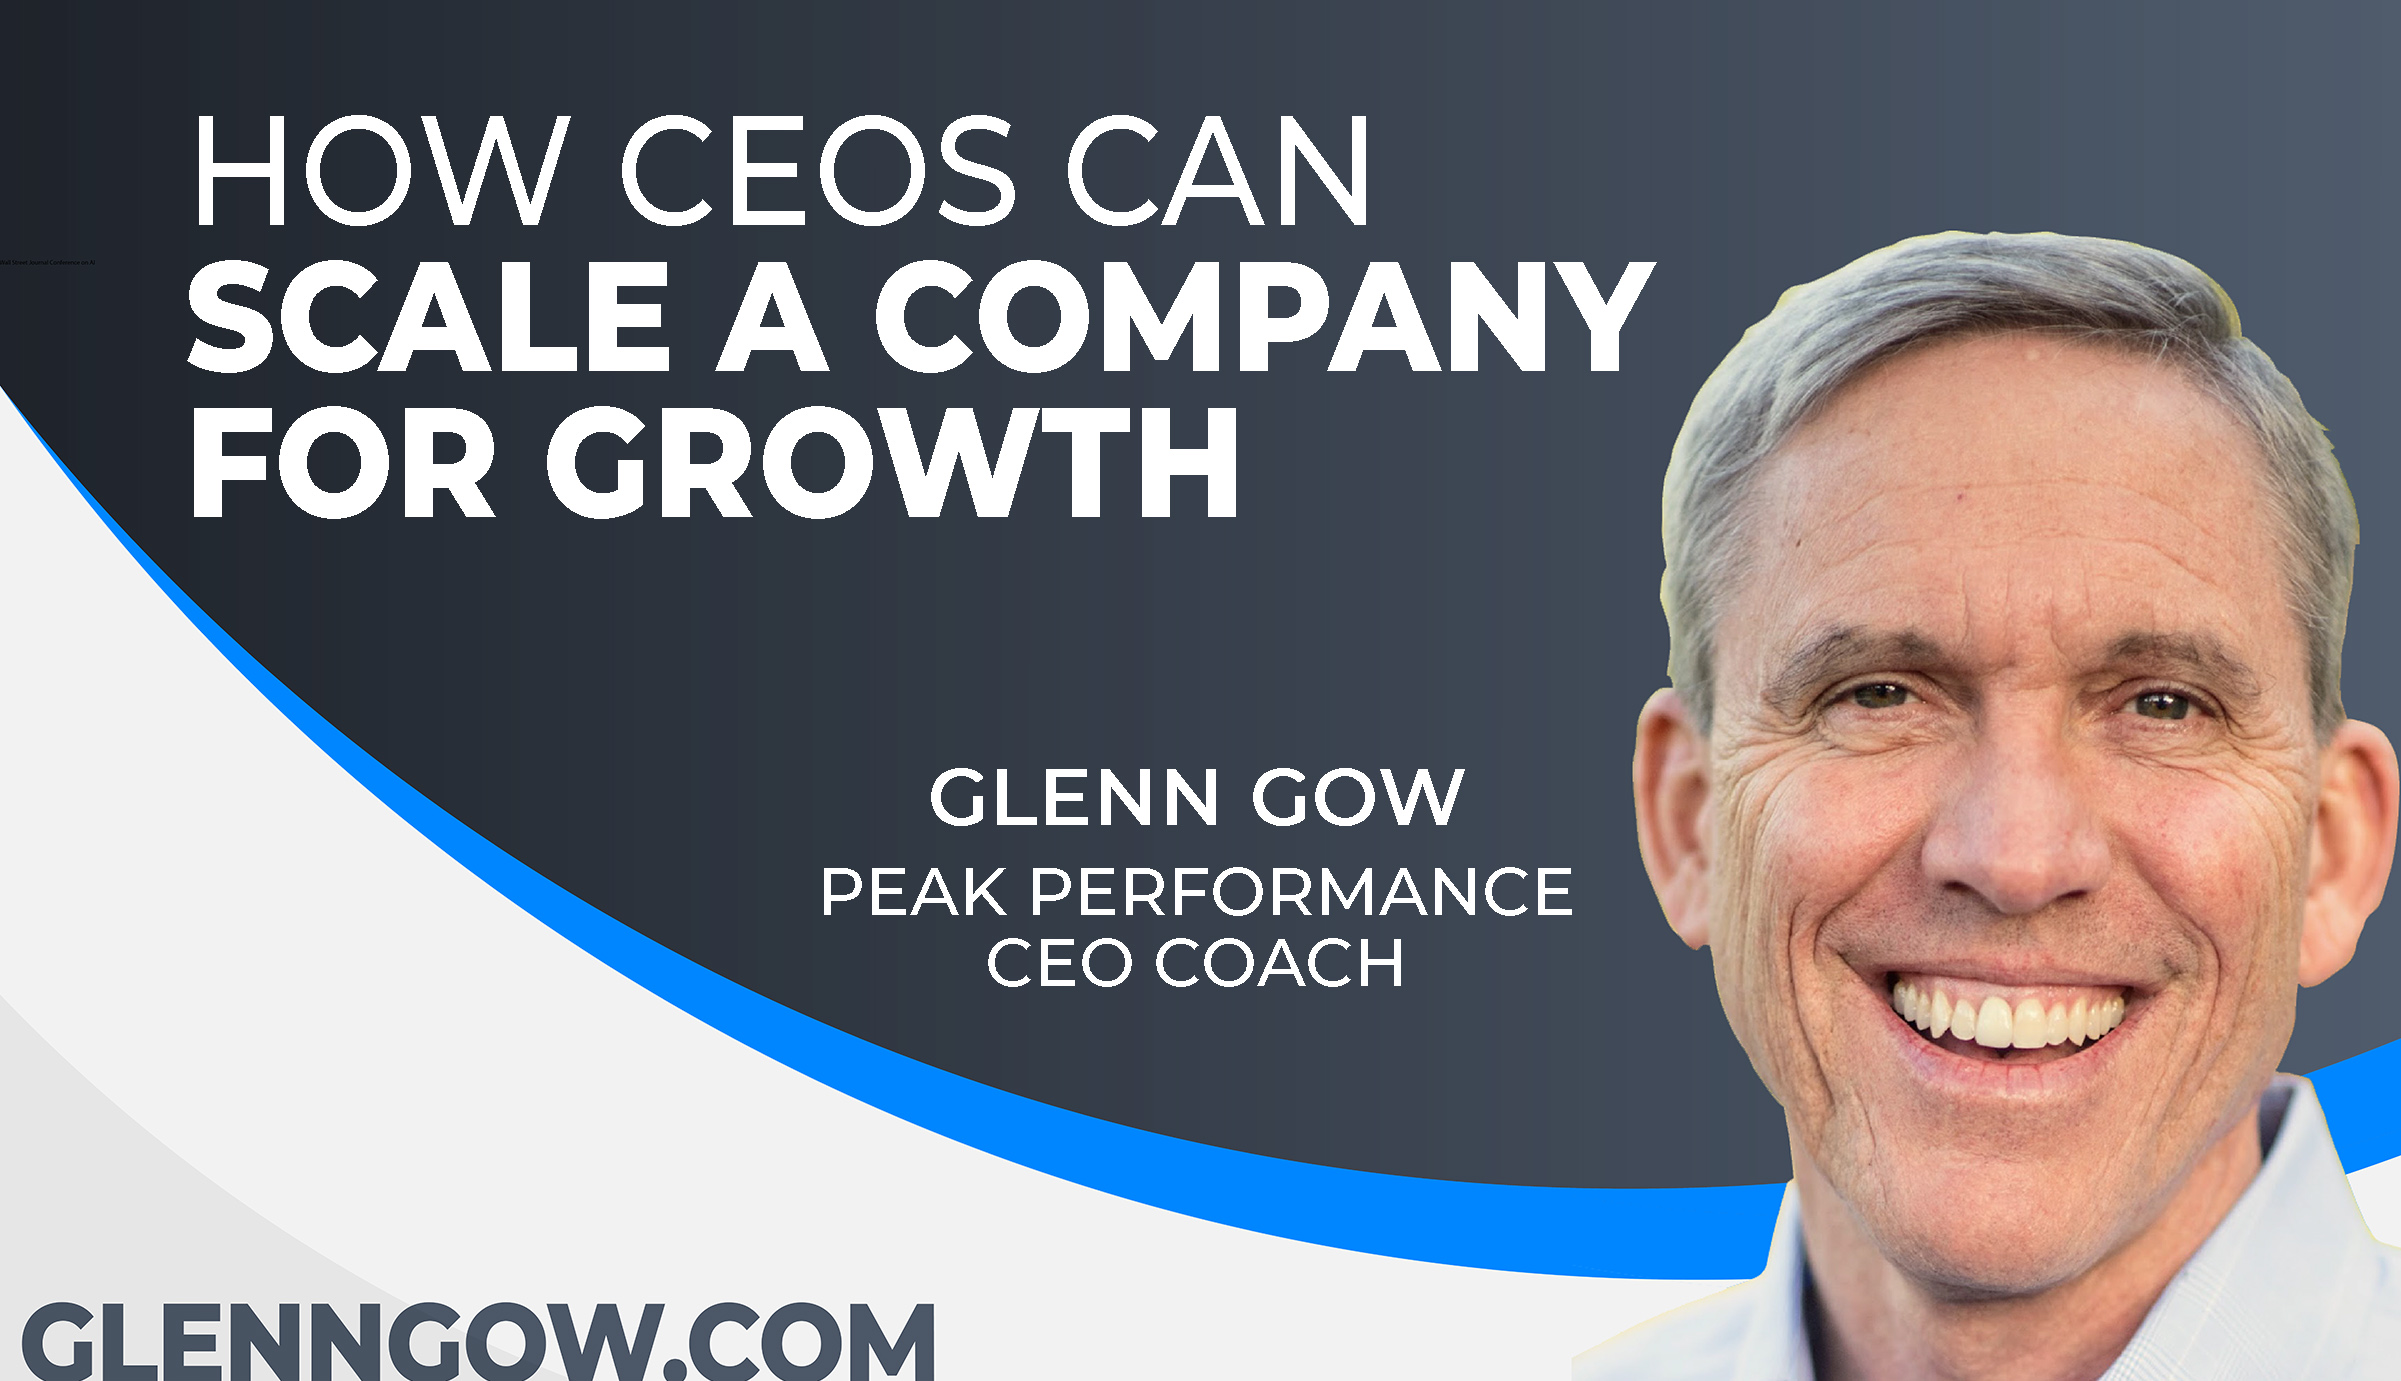 How CEOs can scale a company for growth image banner